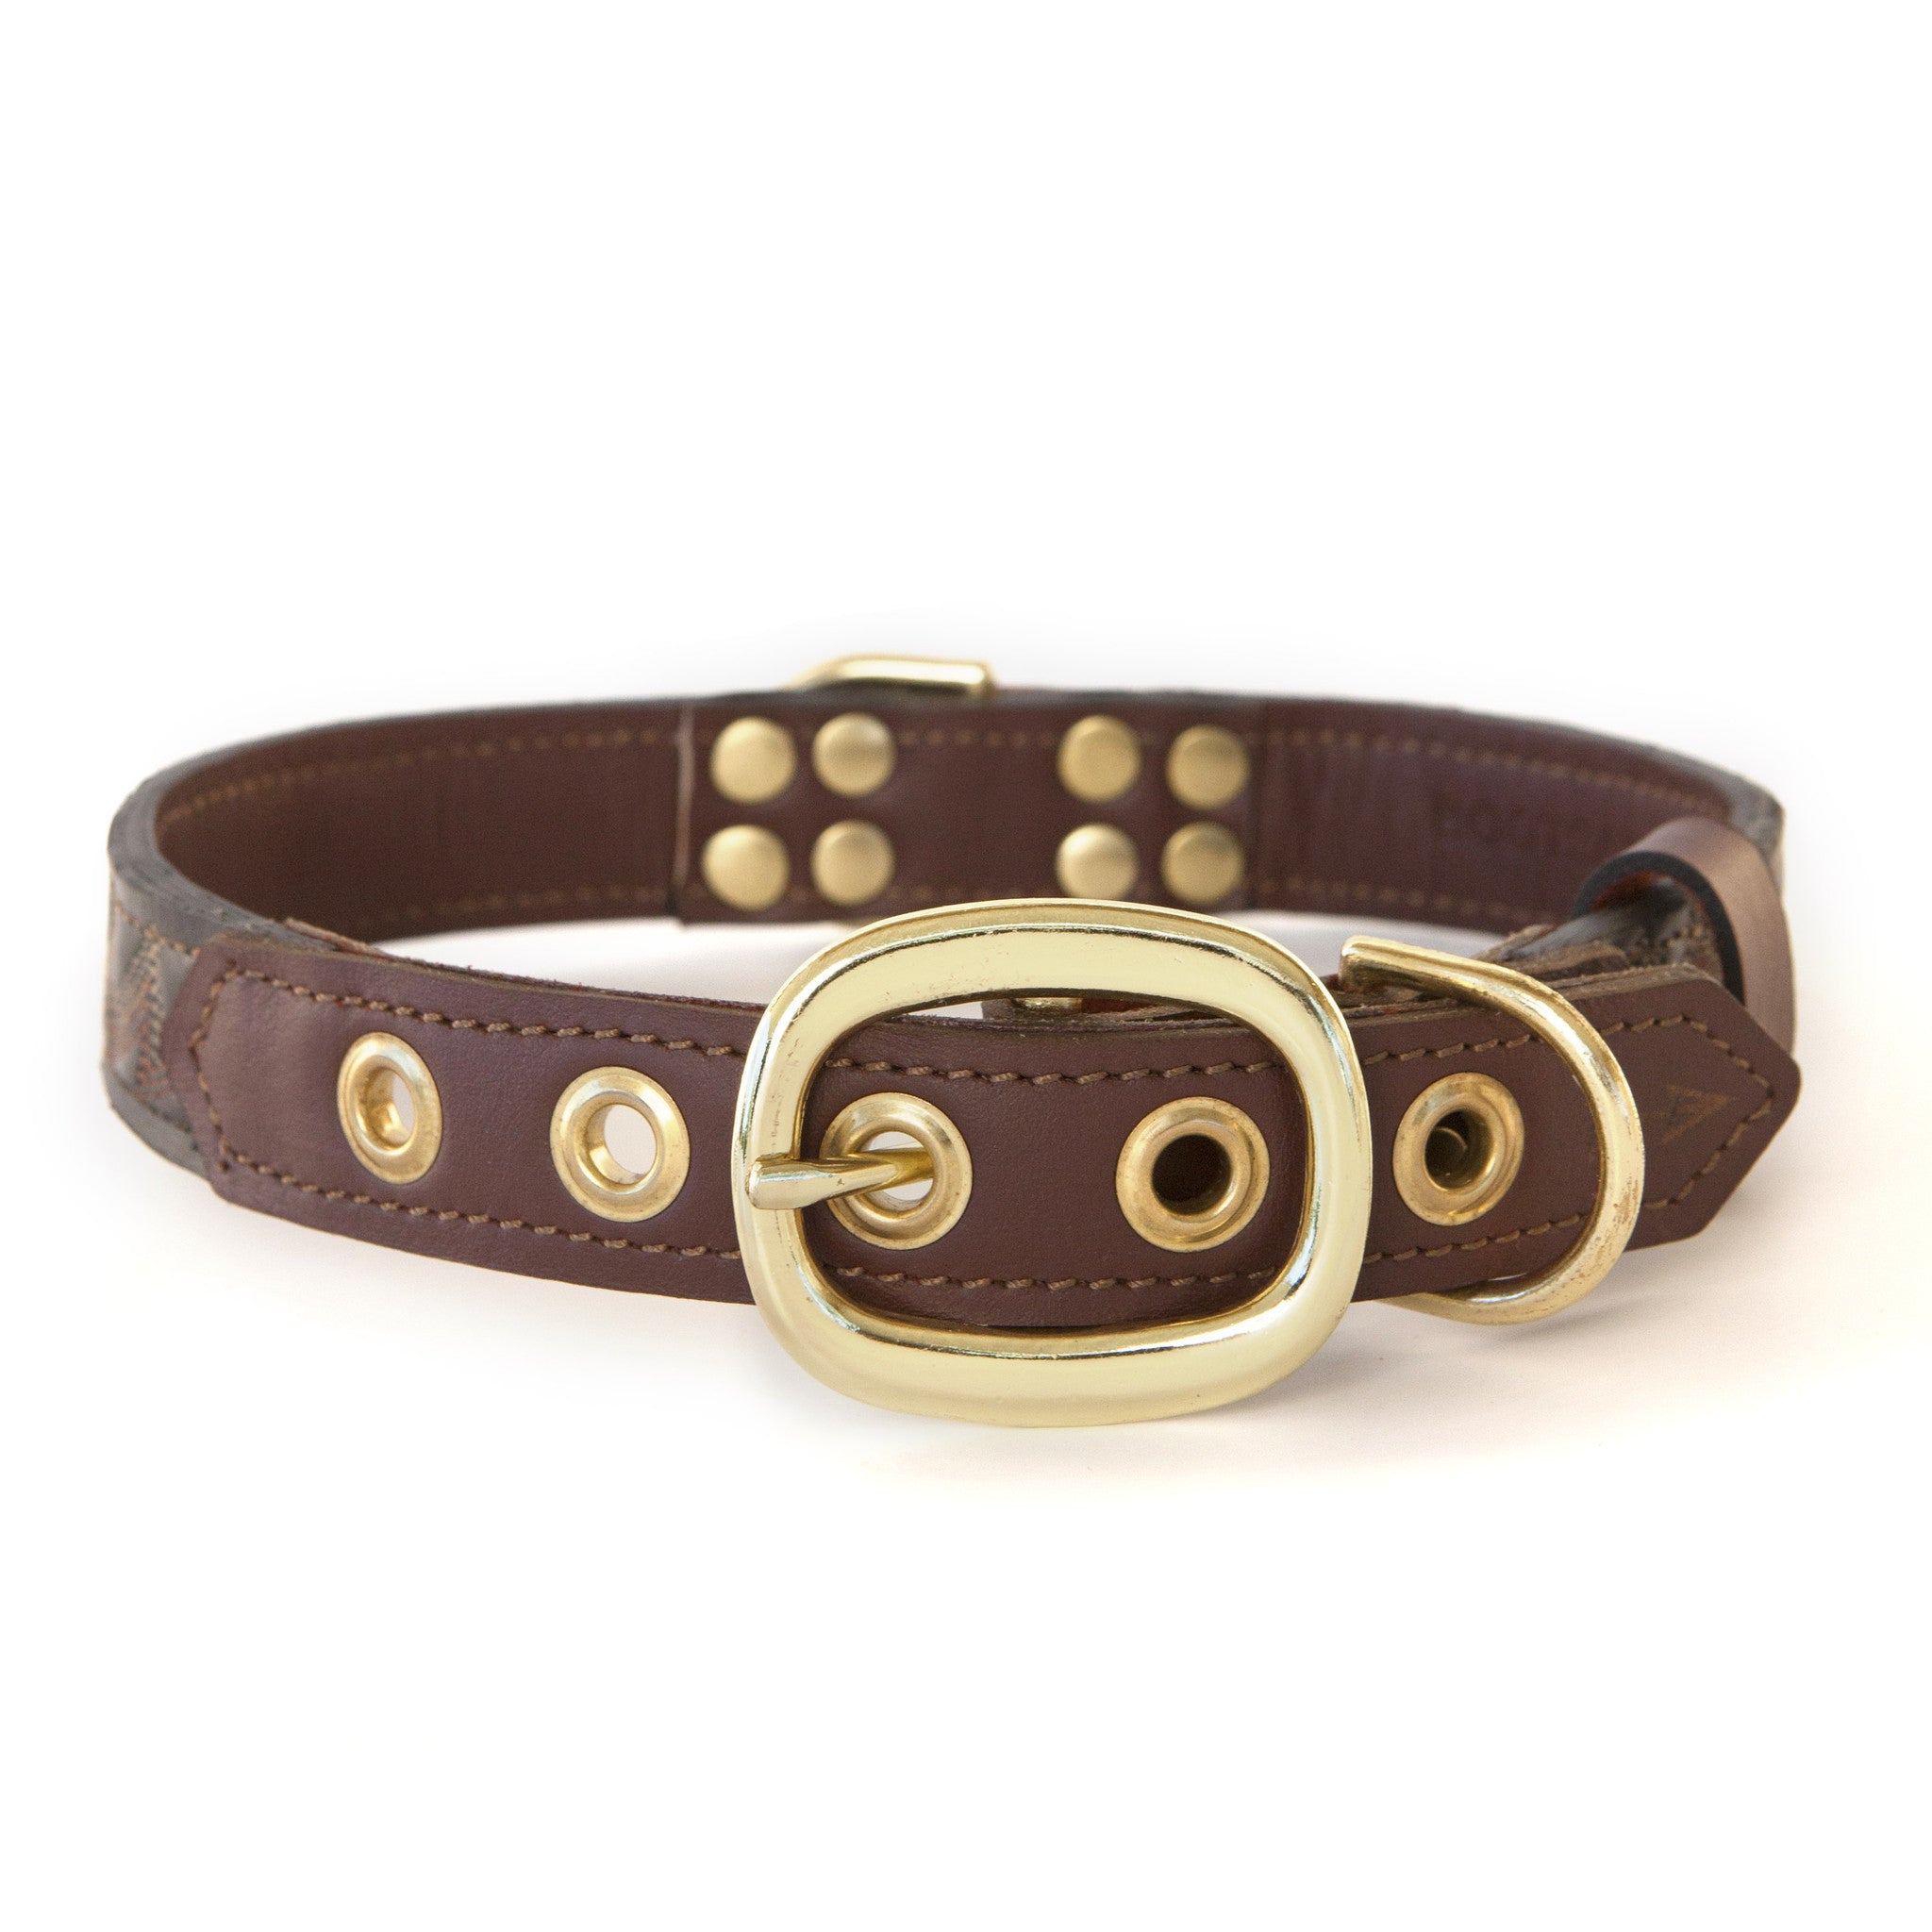 Mahogany Brown Dog Collar with Dark Brown Leather + Tan/Light Rust Stitching (back view)